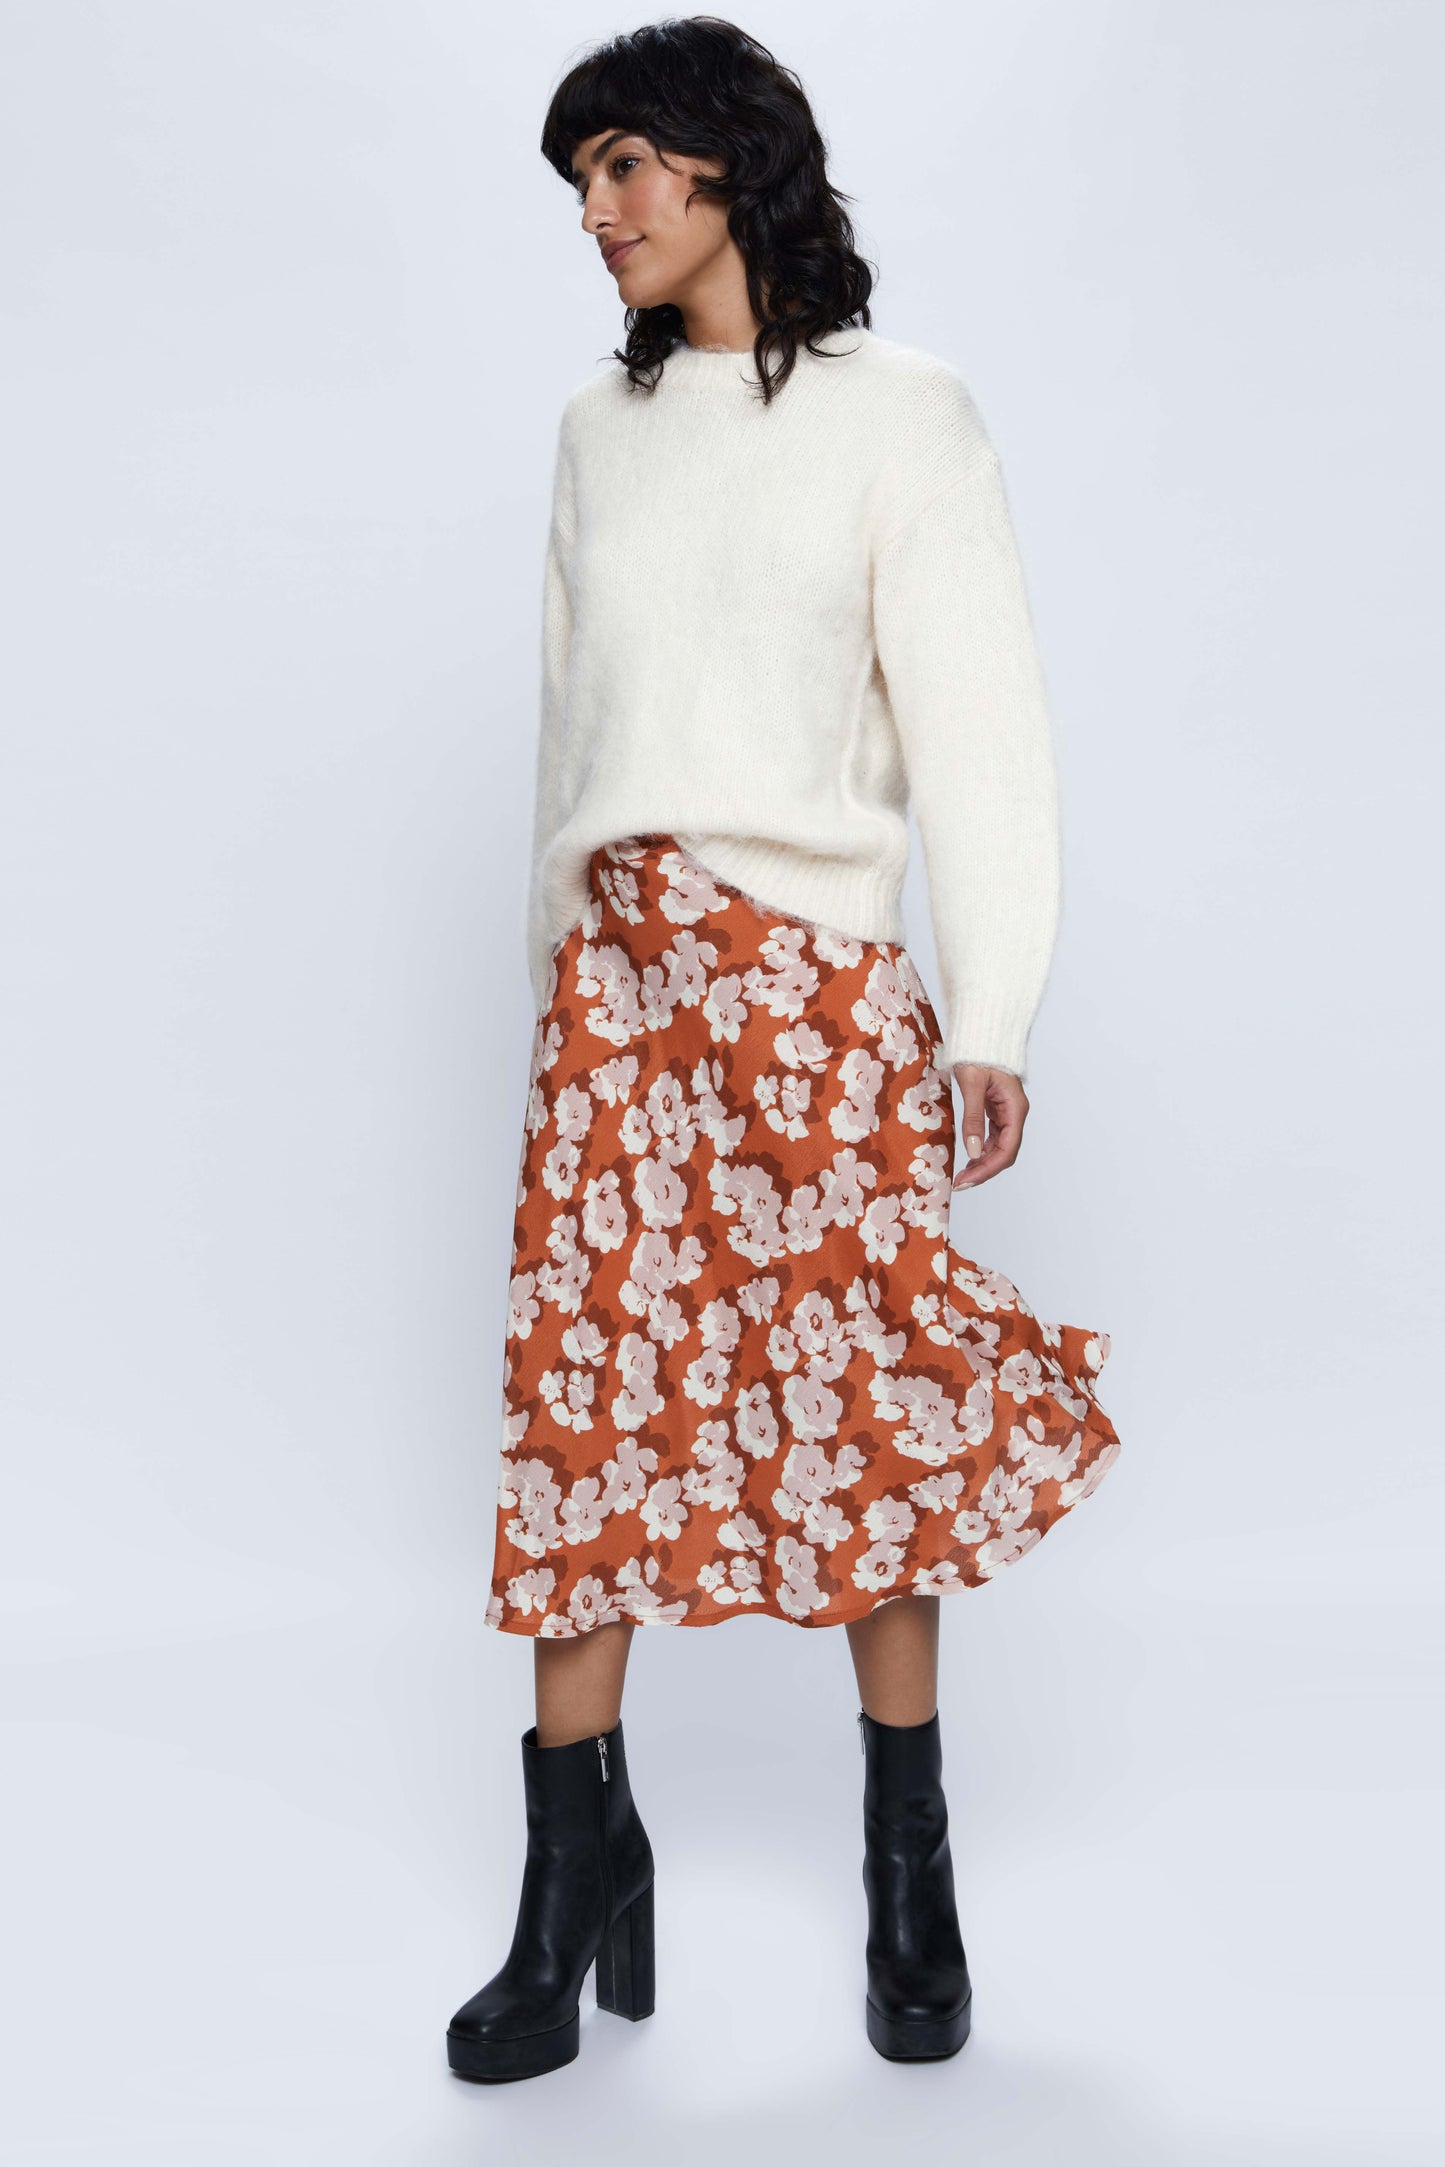 Flowy midi skirt with floral print